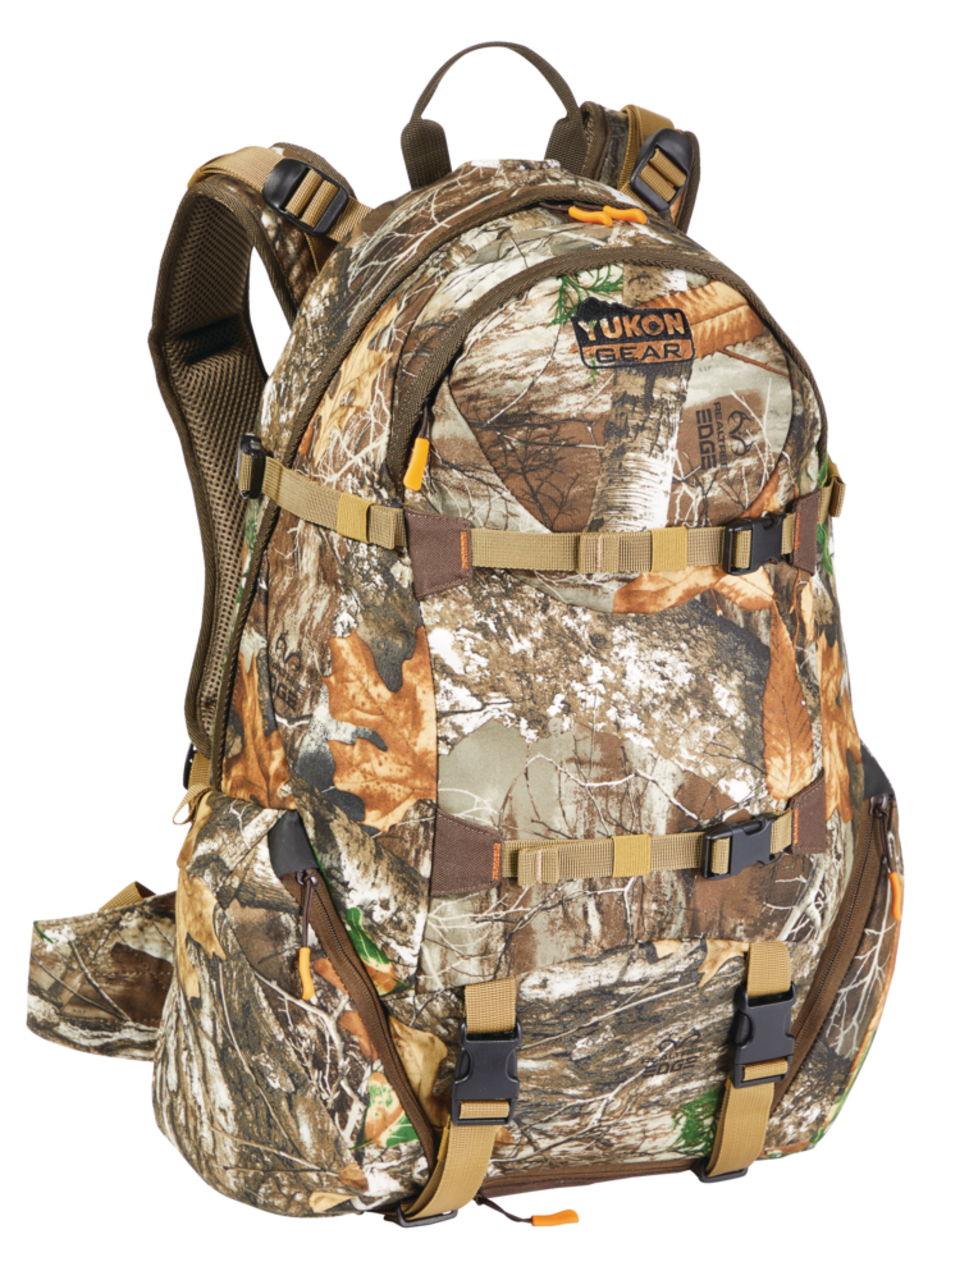 Yukon Gear Oxford Hunting Backpack, Camouflage Realtree Edge, 30-L